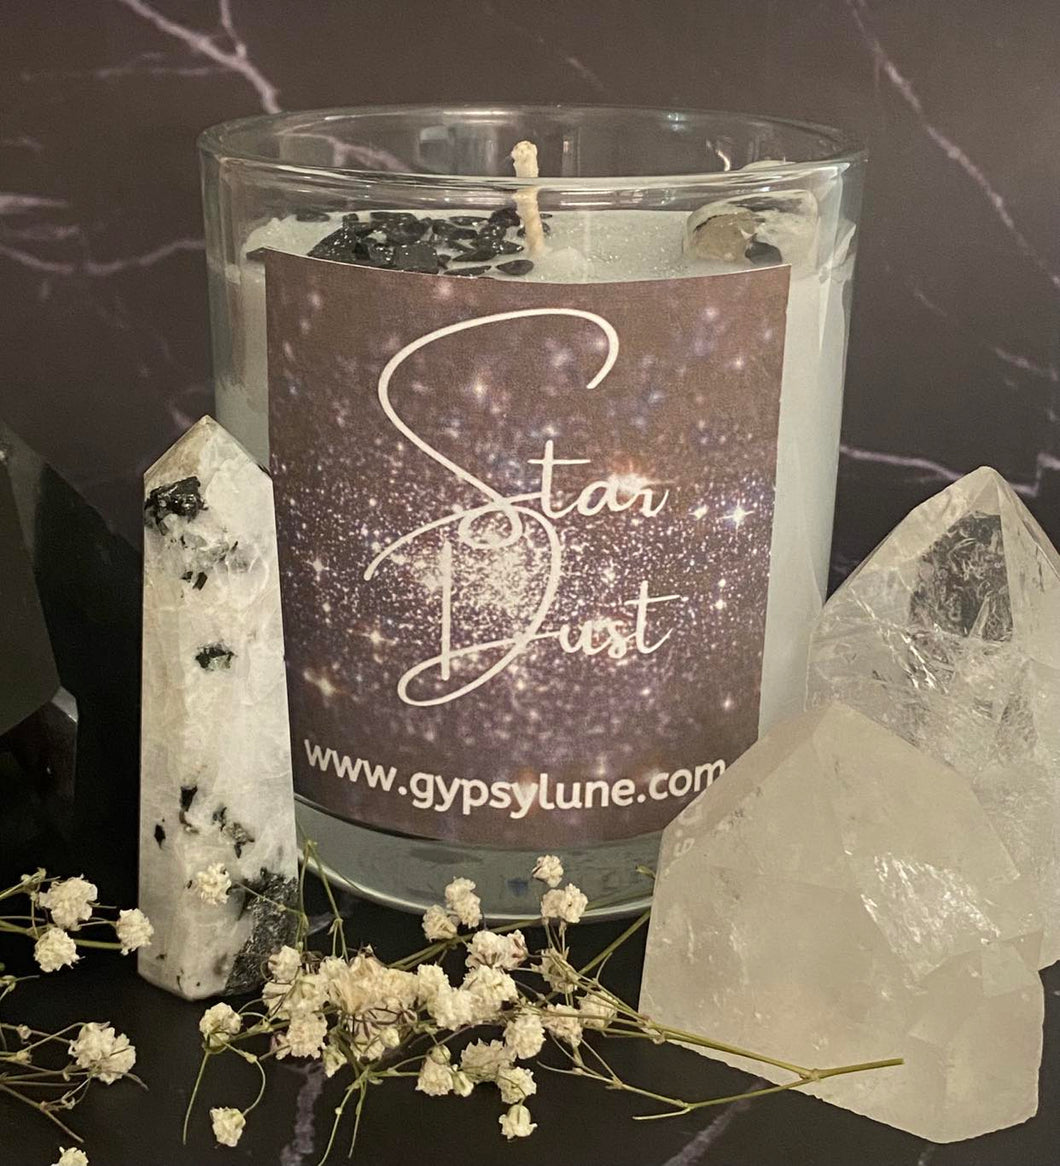 Star Dust Crystal Candle